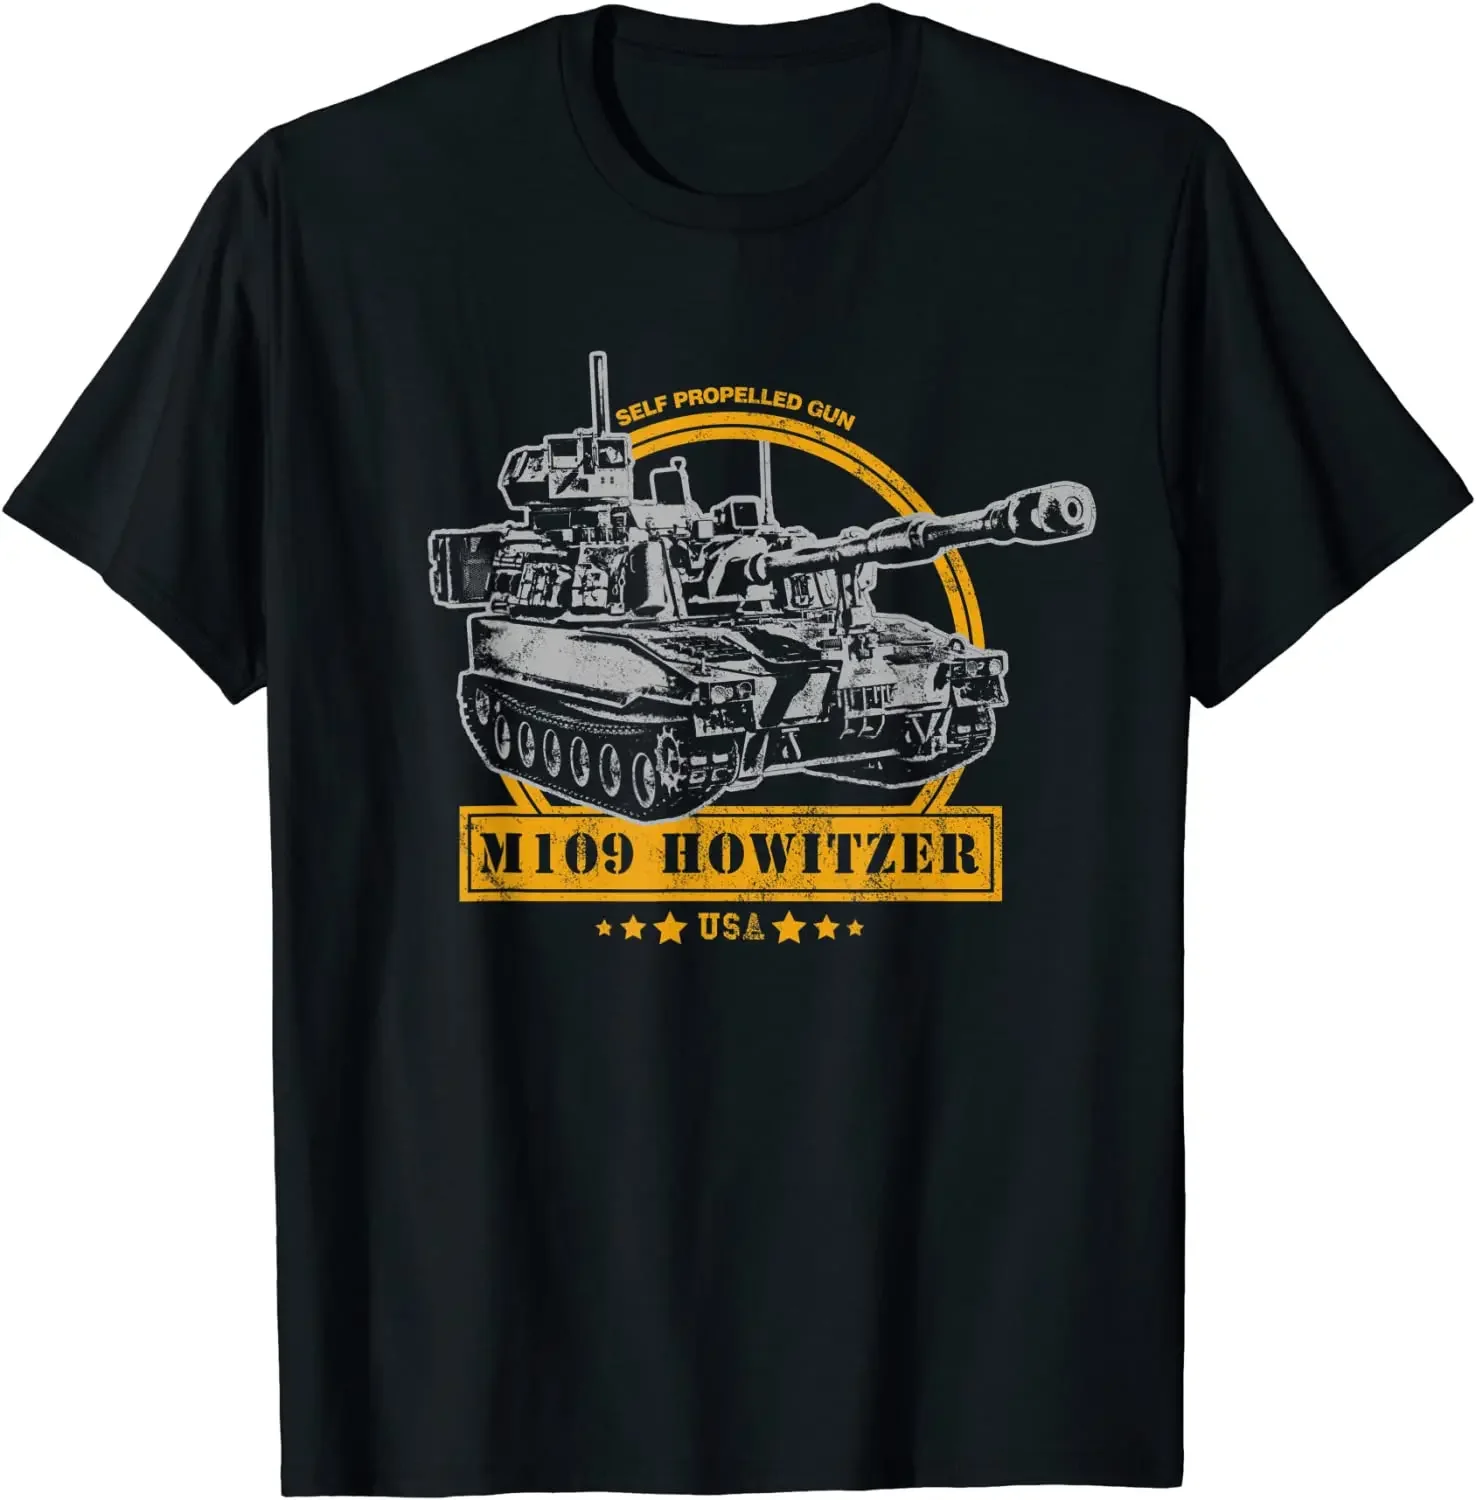 

US Army M109 Self-propelled Howitzer T-Shirt. Summer Cotton O-Neck Short Sleeve Mens T Shirt New S-3XL